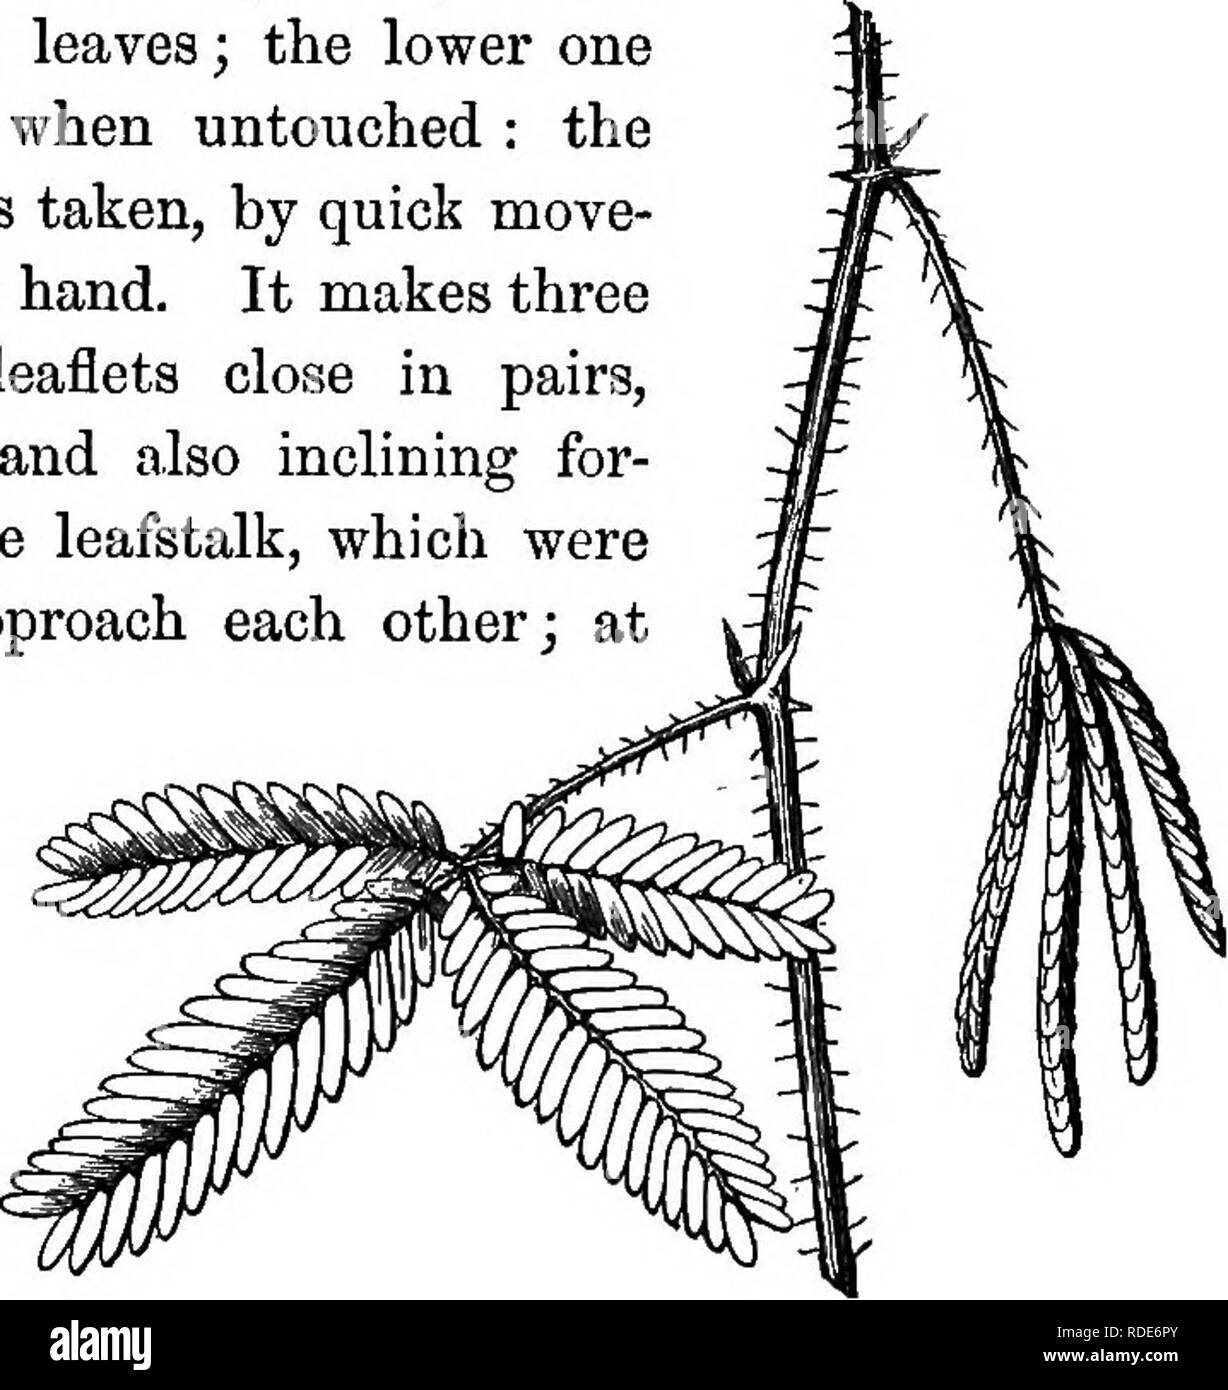 . Botany for young people : Part II. How plants behave ; how they move, climb, employ insects to work for them, &amp; c. Botany. HOW PLANTS BEHAVE, CHAPTER I. HOW PLANTS MOVE, CLIMB, AND TAKE POSITIONS. 1. Two plants — one of them common in cultivation, and the other rarer, but almost as easy to raise — are looked upon as vegetable wonders, namely, the Sensitive Plant and Desmodium gyrans. They are striking examples of 2. Plants that move their Leaves freely and rapidly. In the well-known Sensitive Plant {Mimosa pudica) the foliage quickly changes its position when touched, appearing to shrink Stock Photo